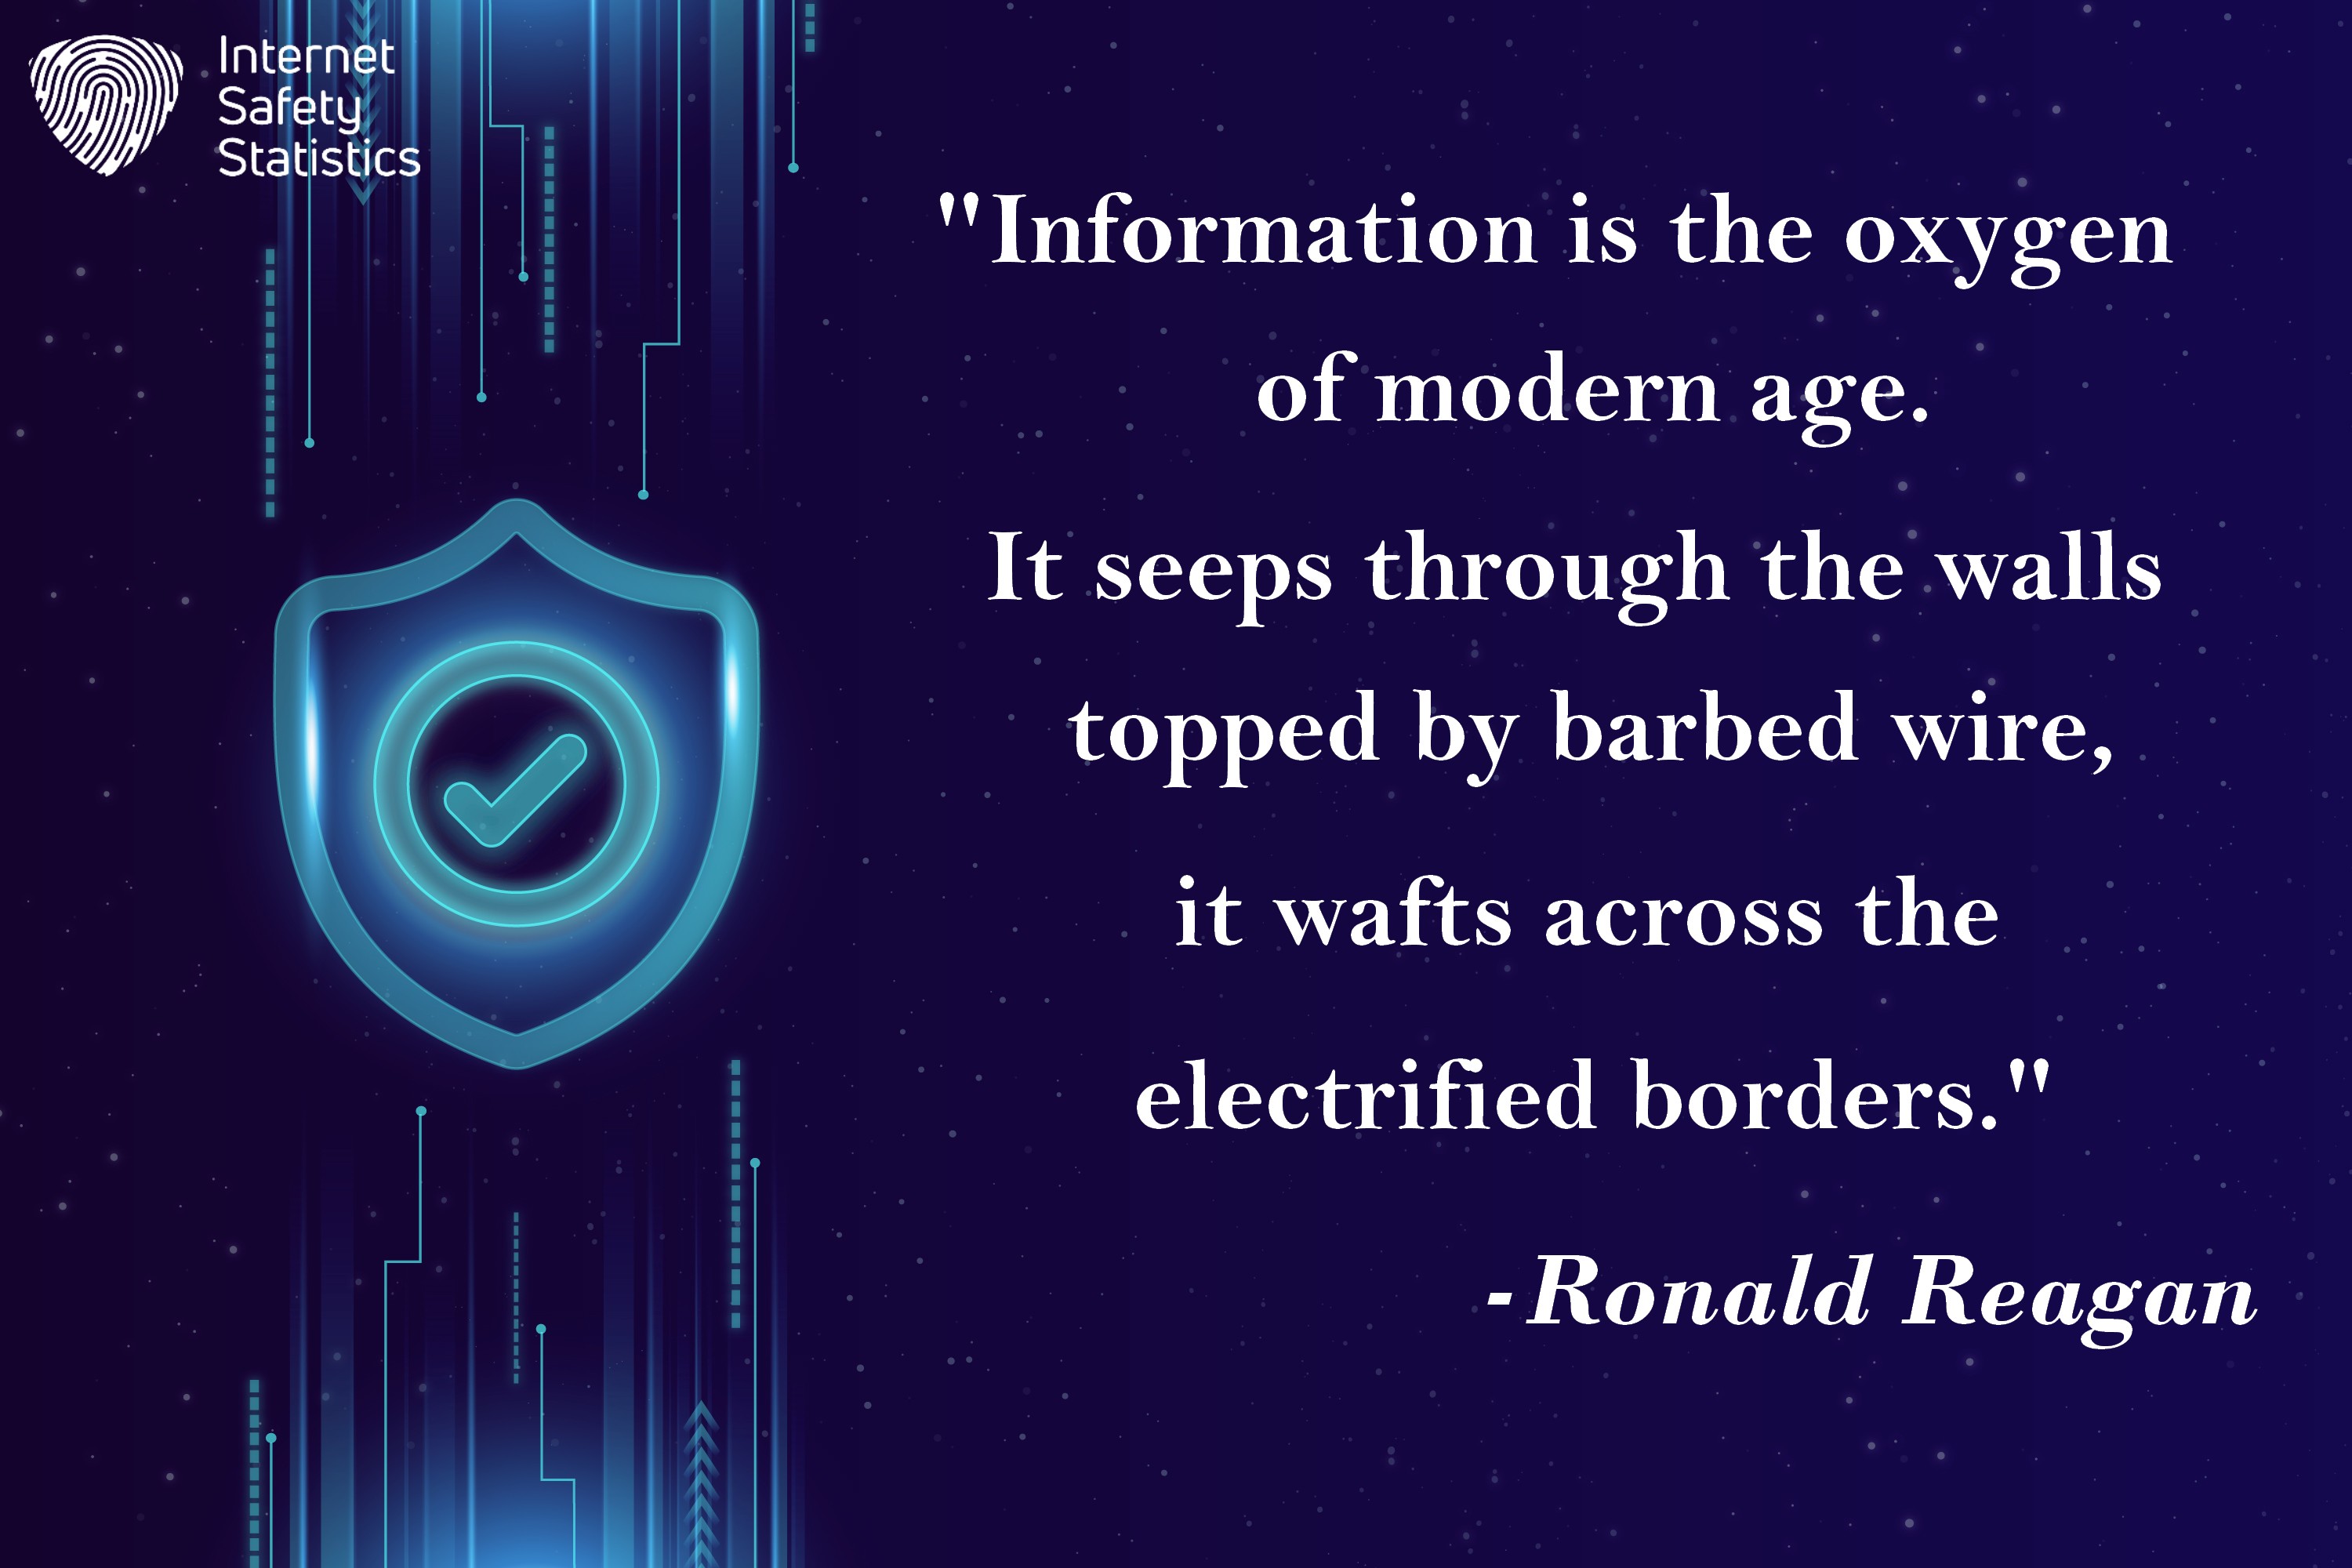 Cybersecurity Quotes About Its Aspects and Functions